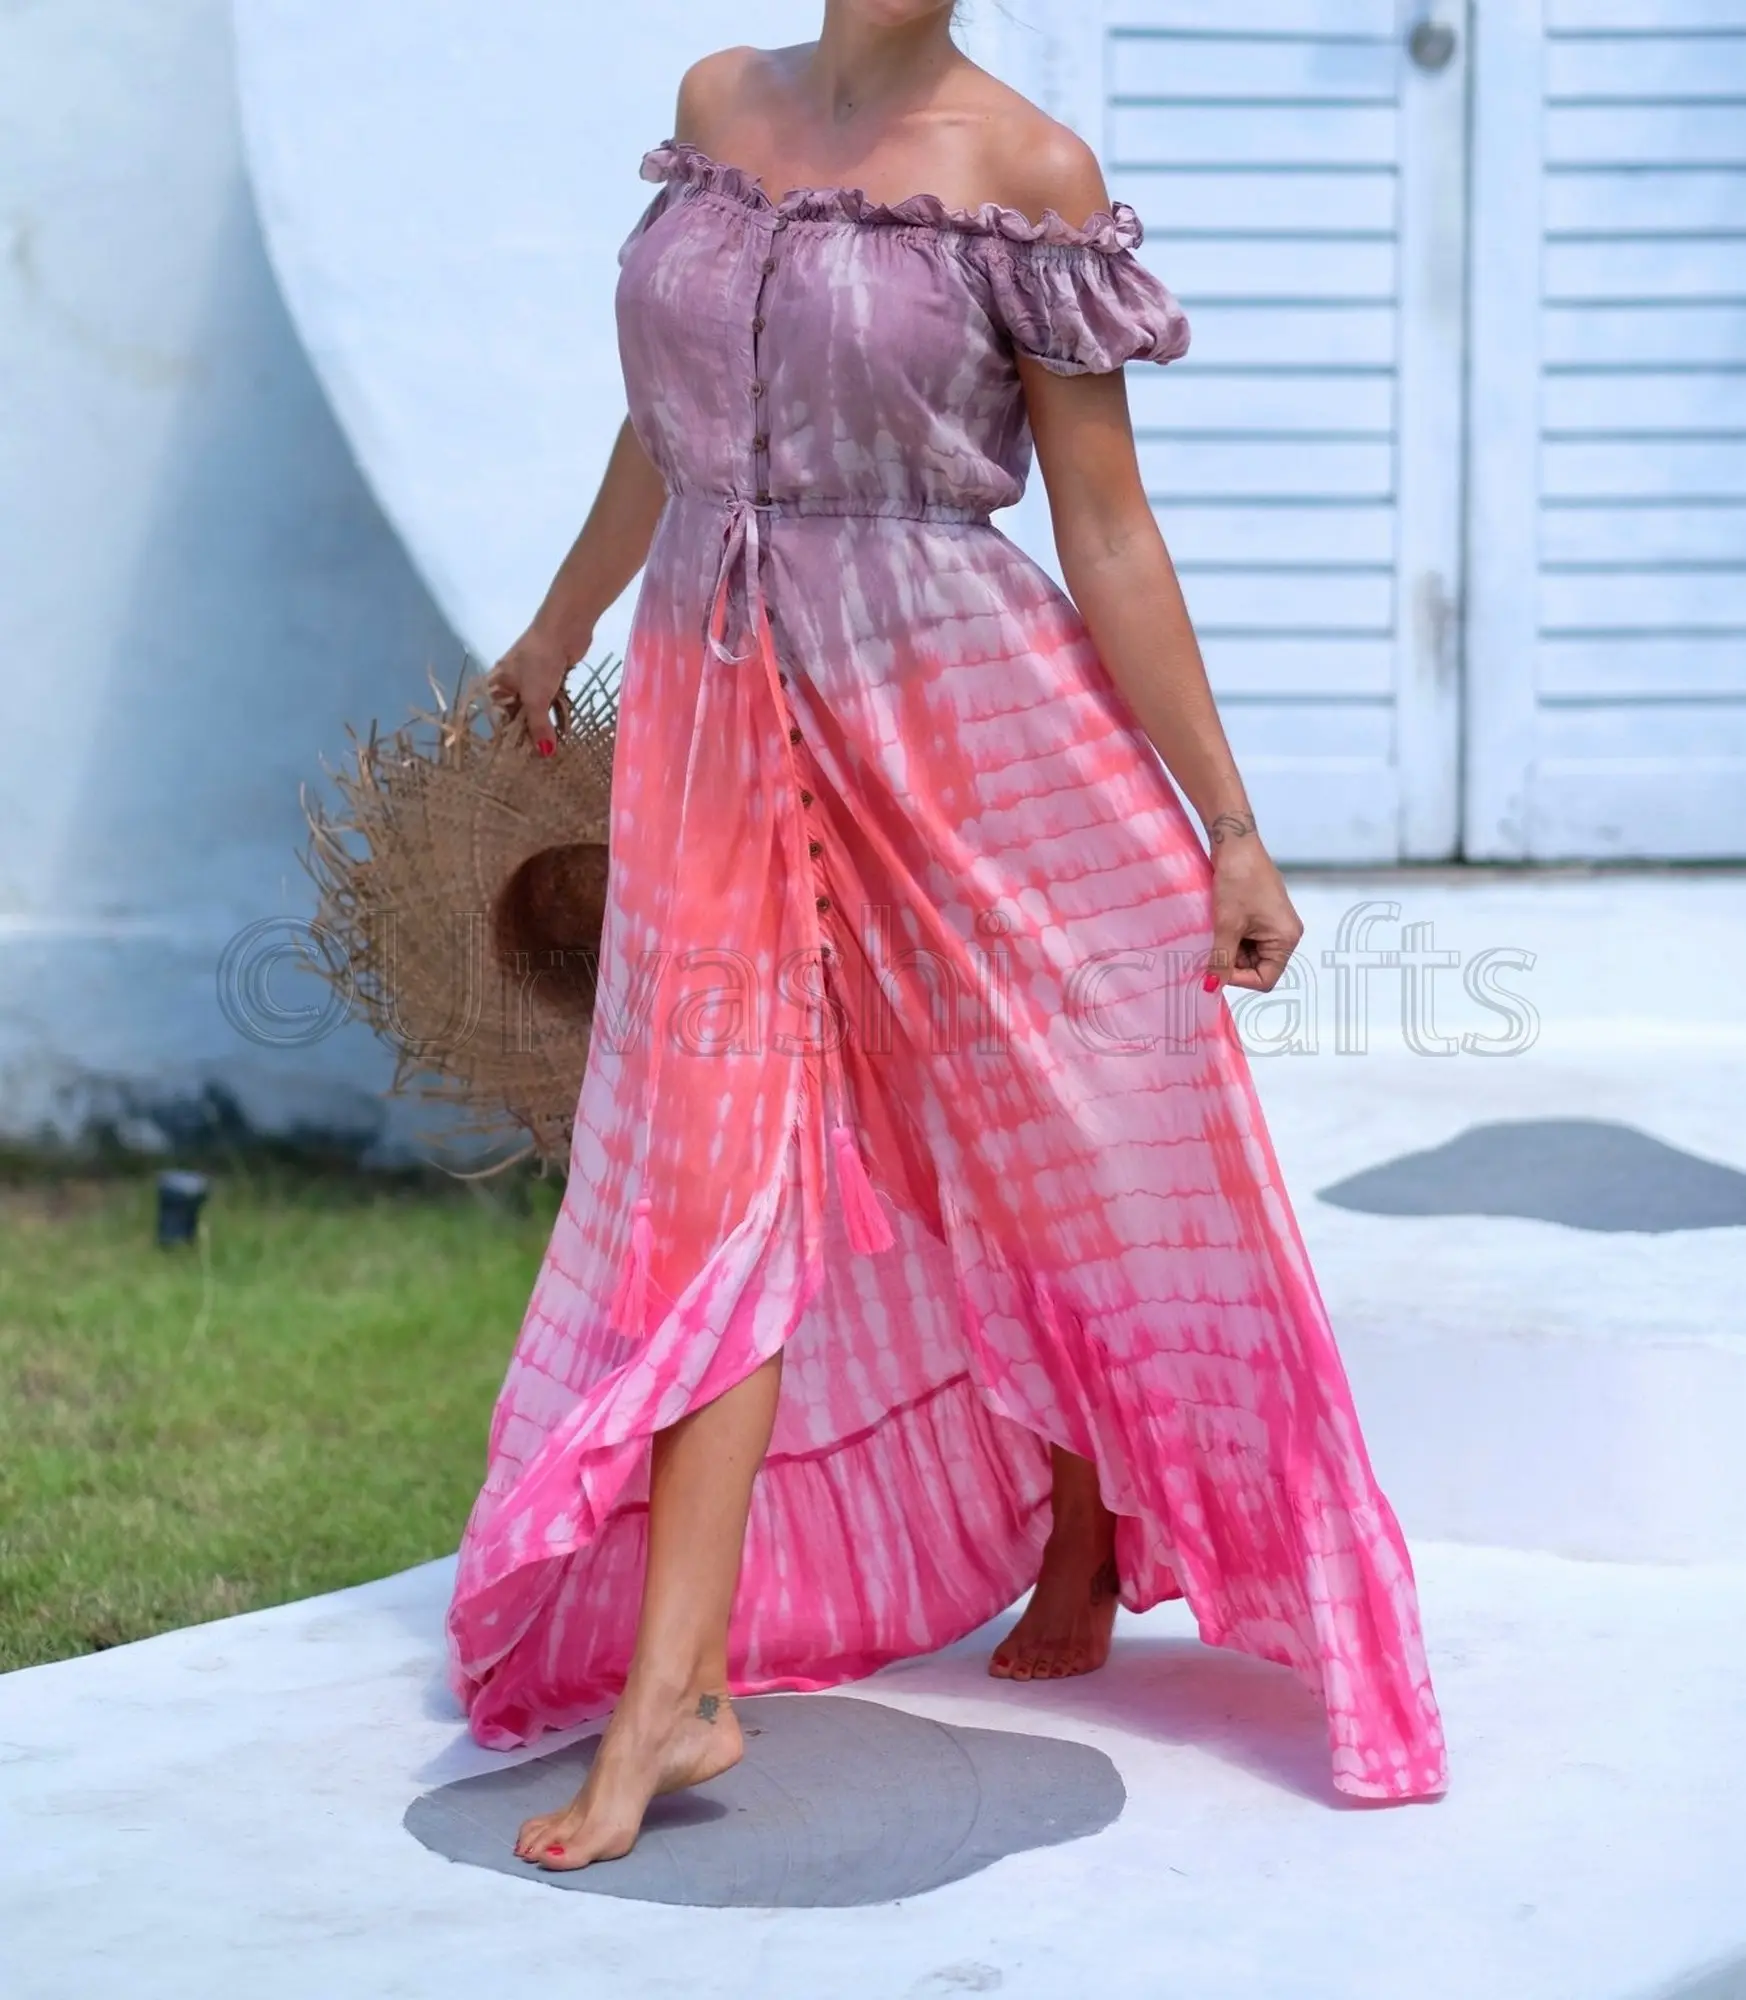 Eye Catching Feminine Sexy Trendy Look Floral Adorned Traditional Indian tie dye off shoulder Cool Summer Resort Wear Maxi Dress